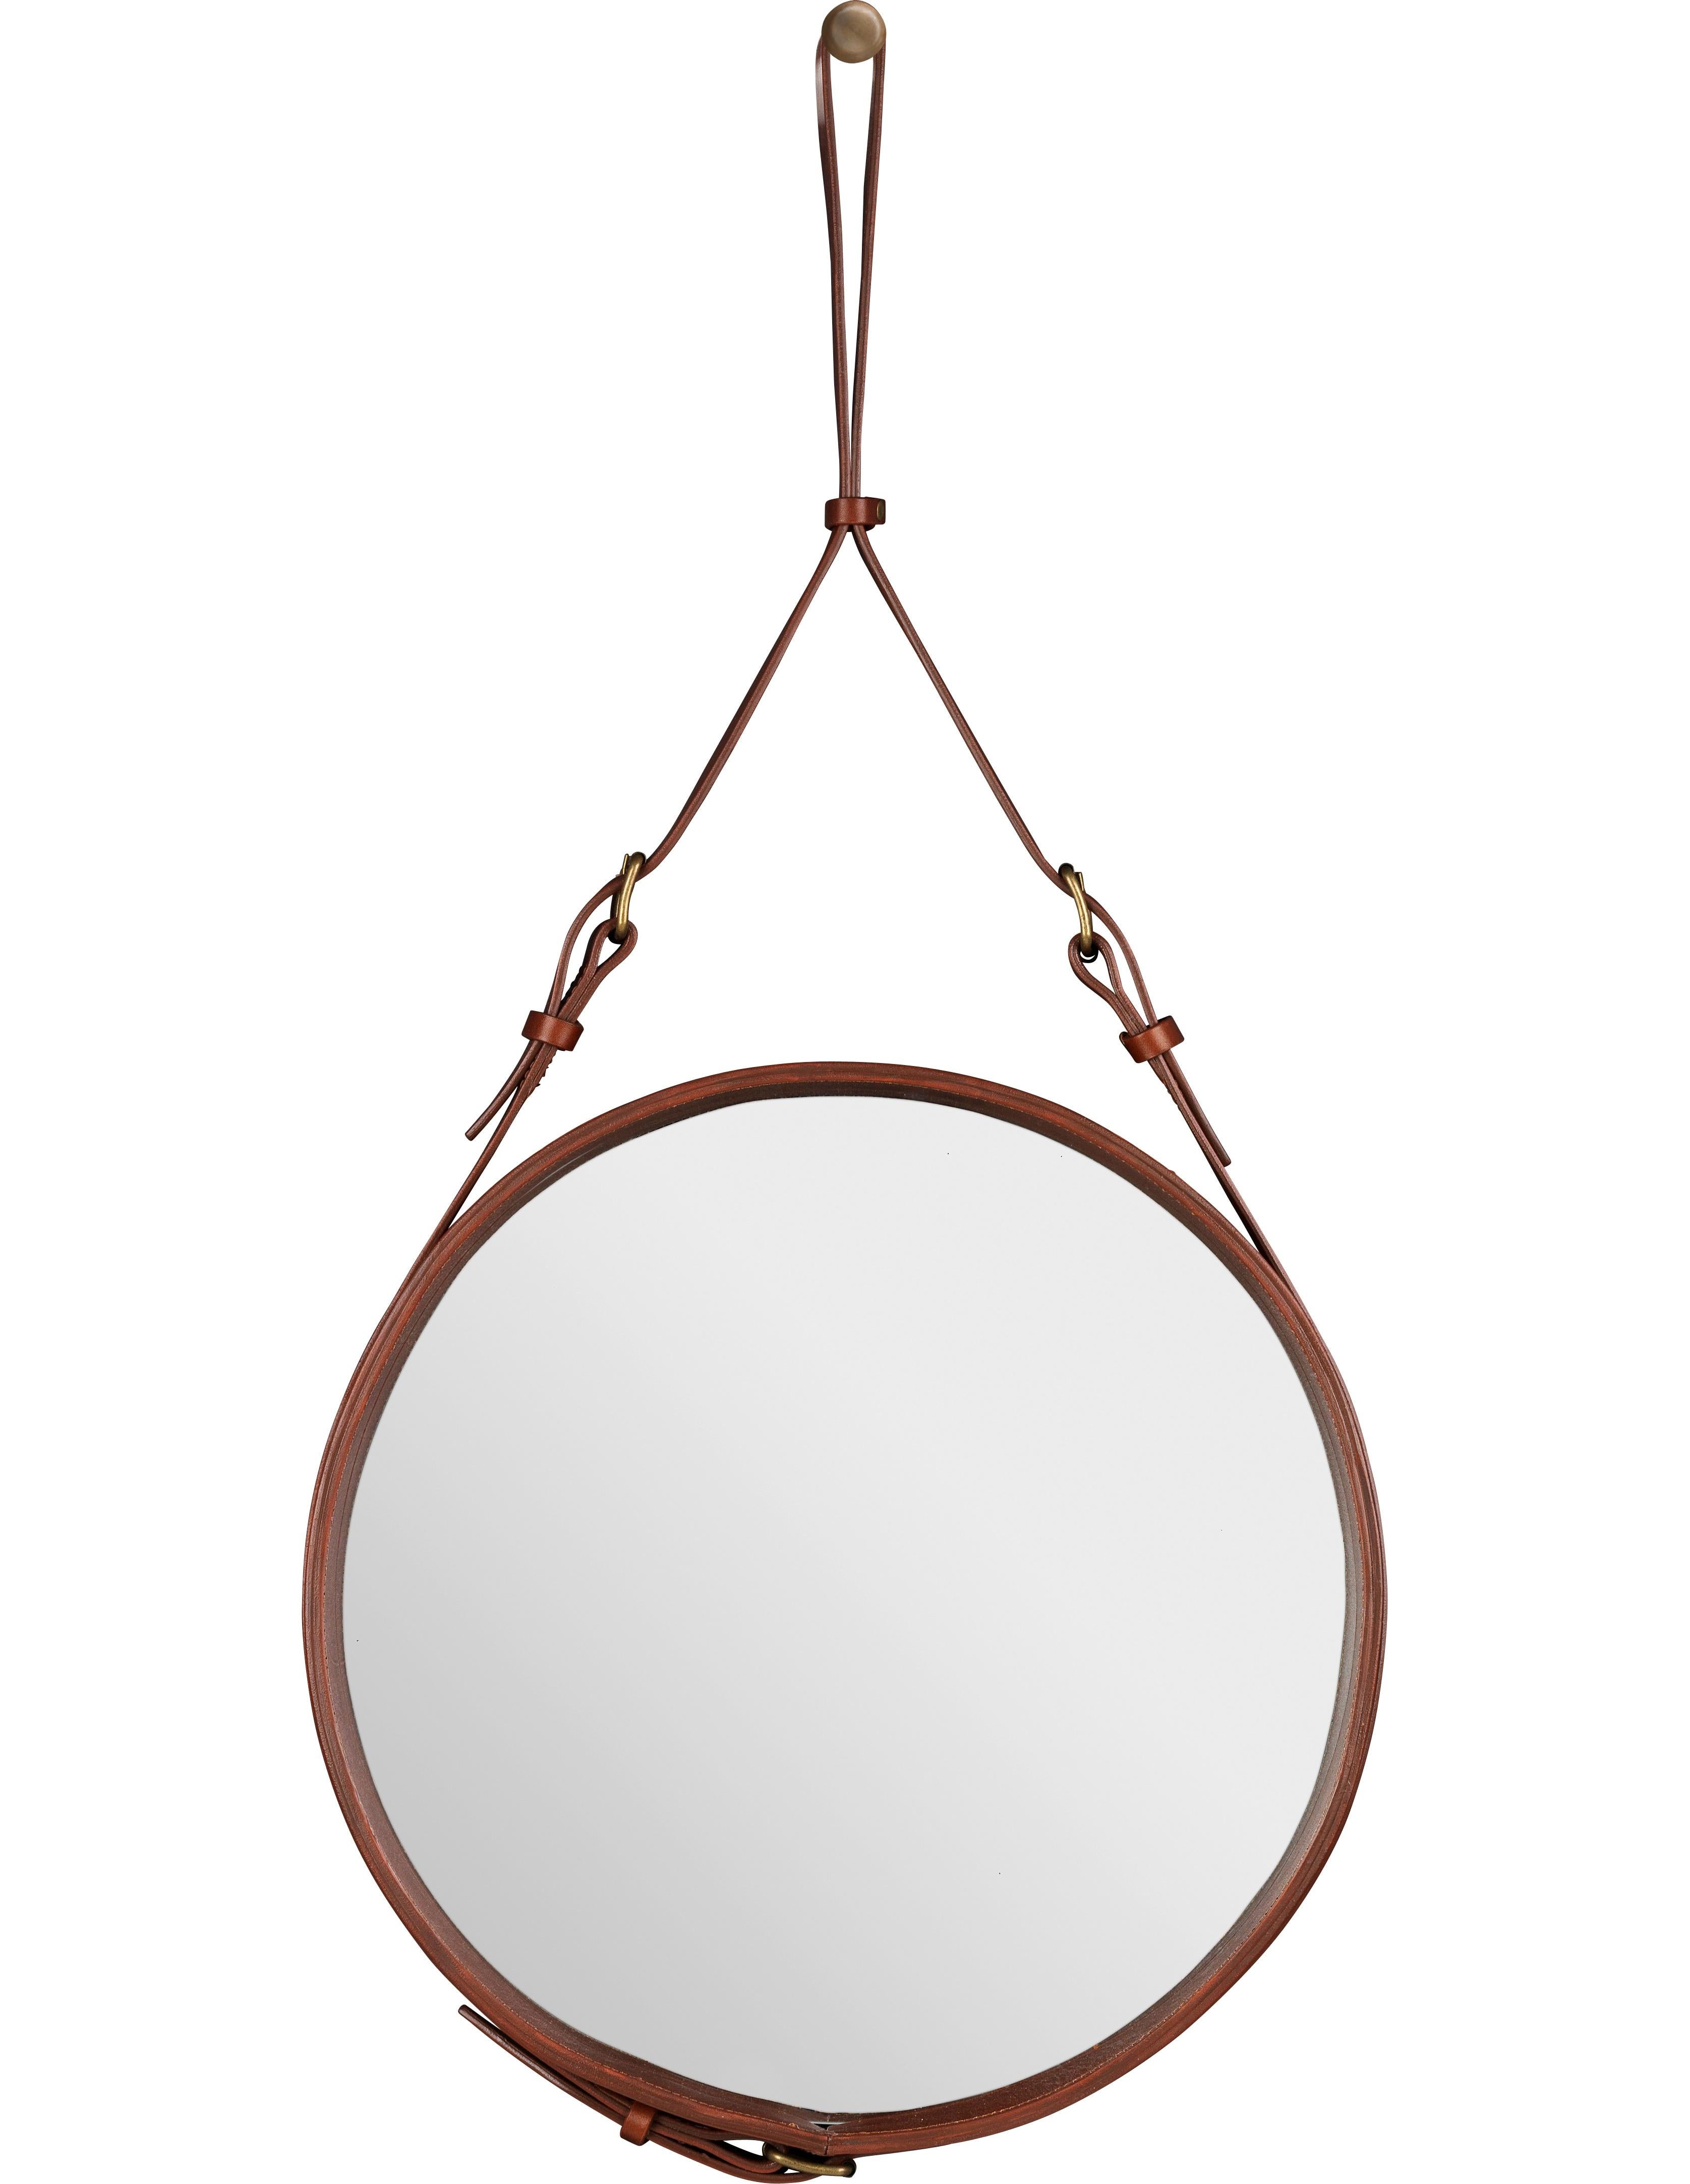 Jacques Adnet Small Circulaire Mirror with Black Leather In New Condition For Sale In Glendale, CA